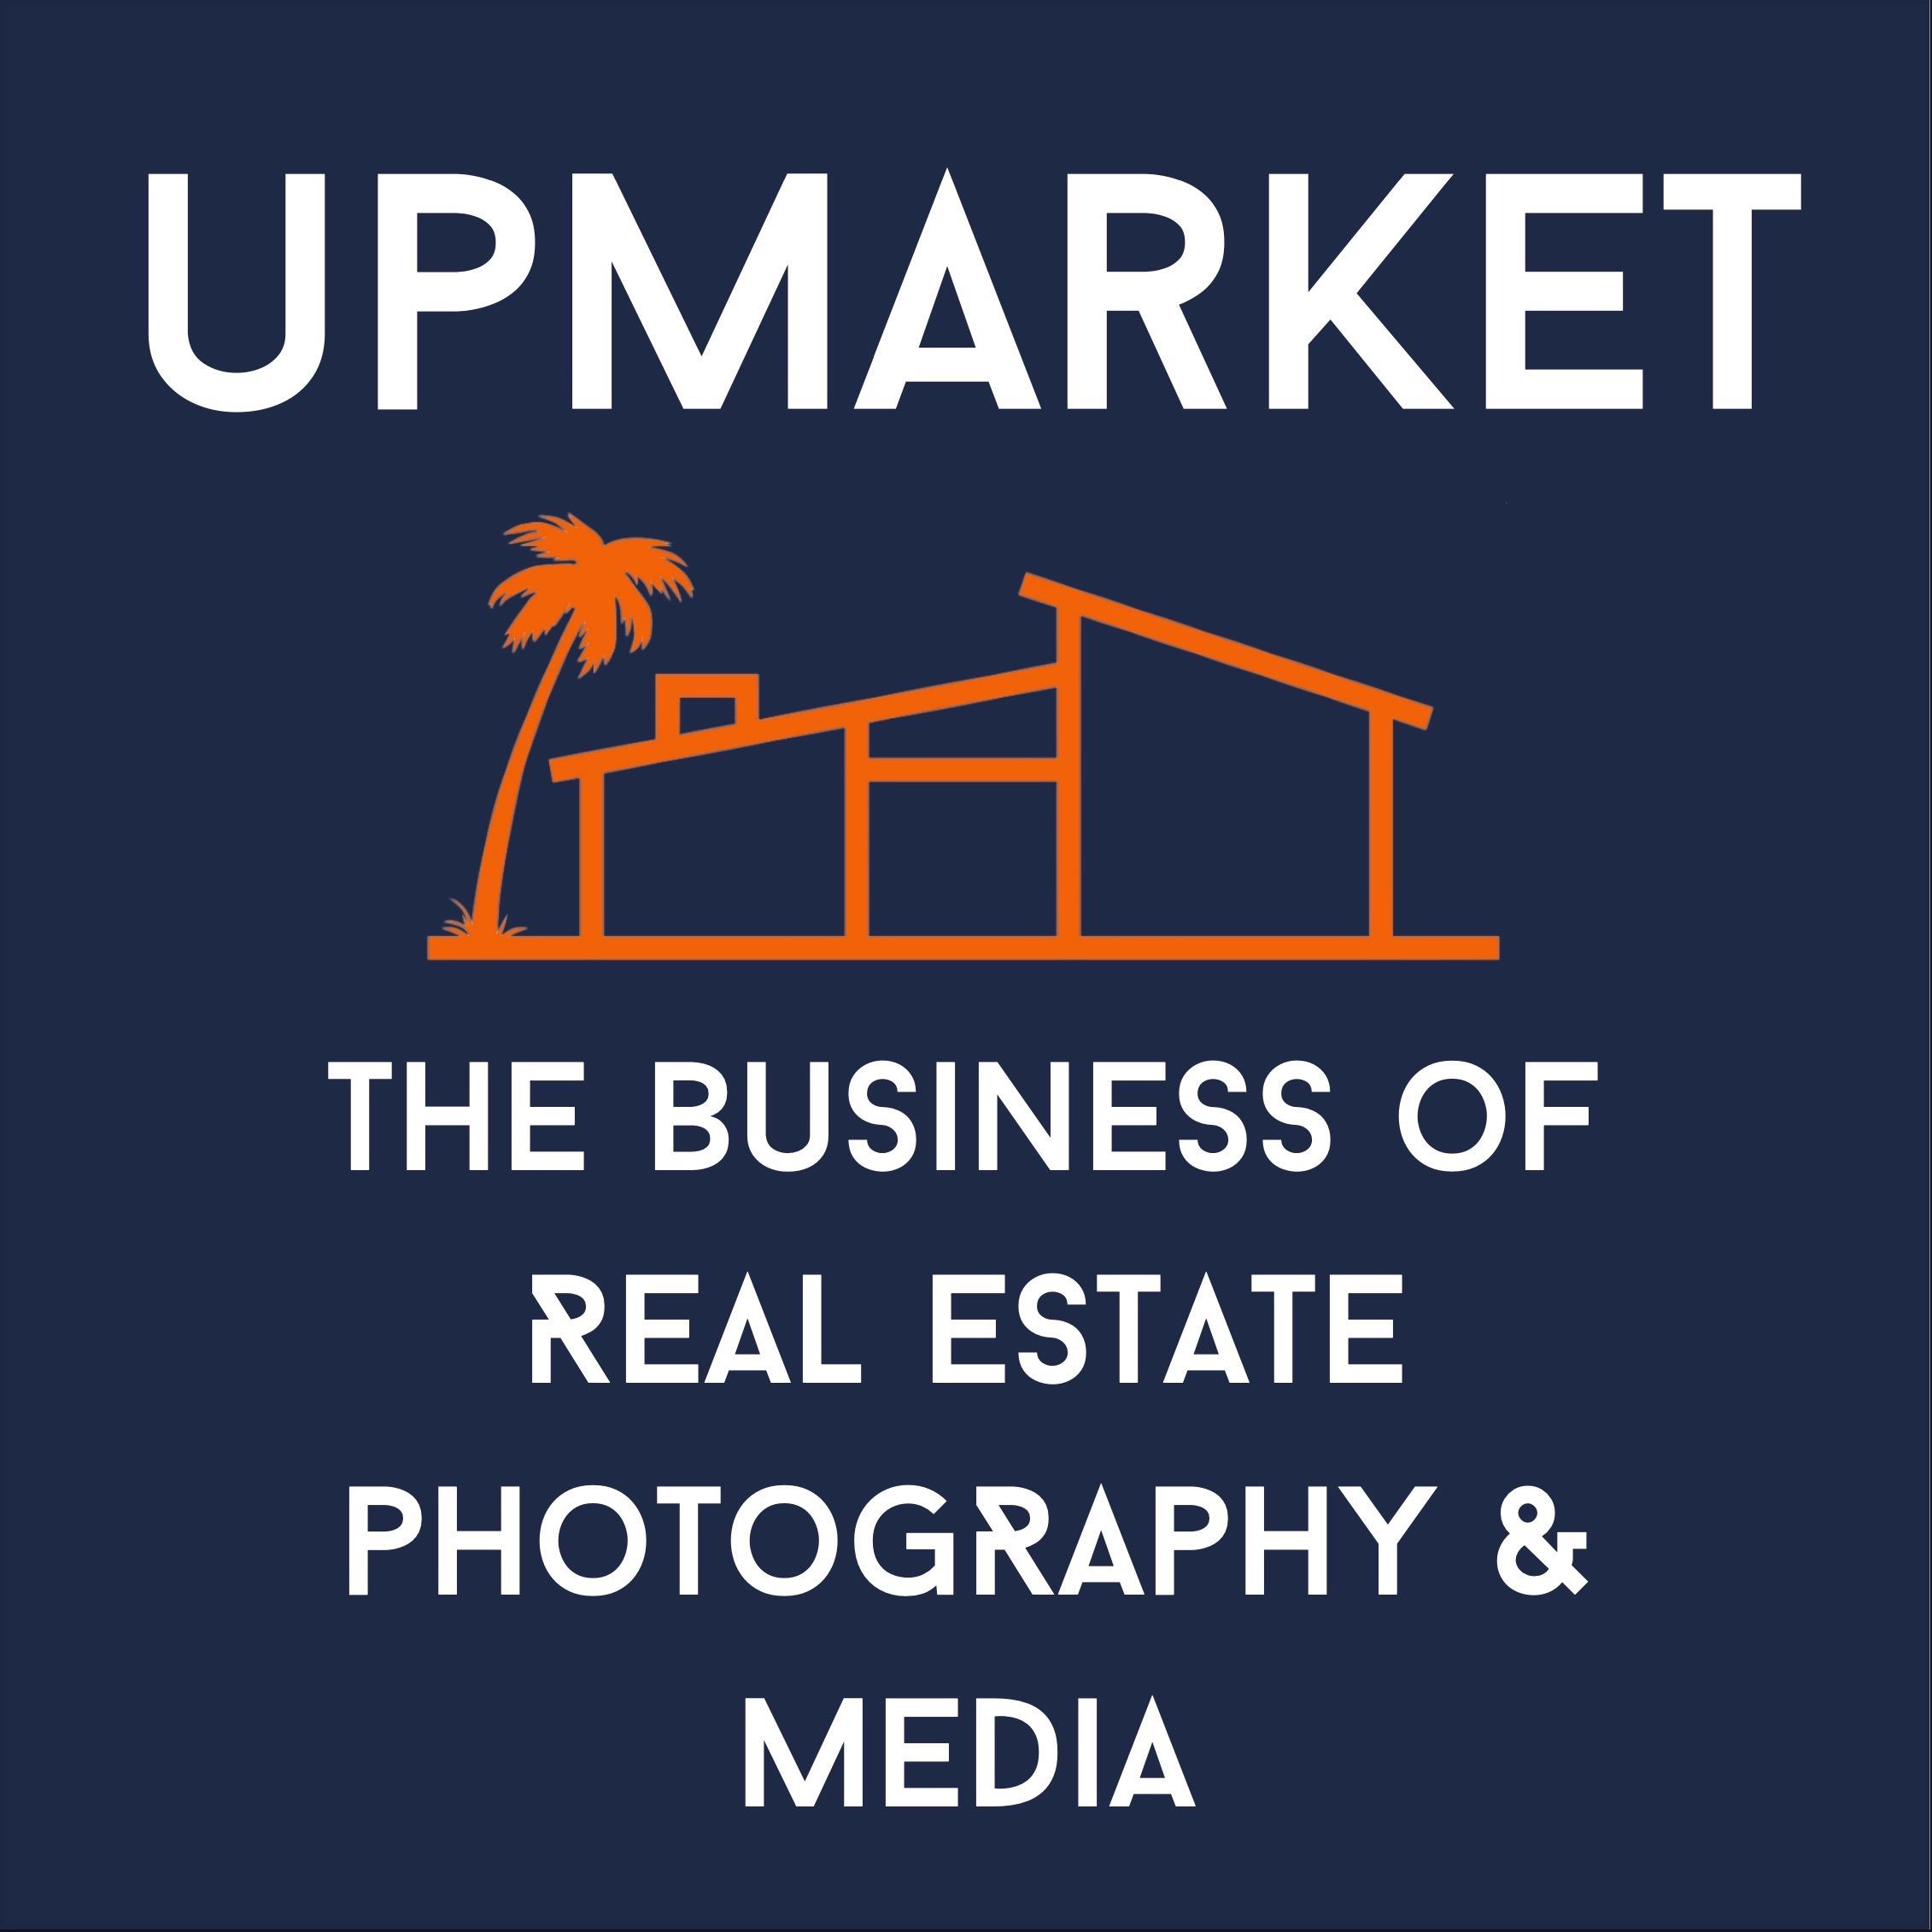 Upmarket: The Business of Real Estate Photography & Media